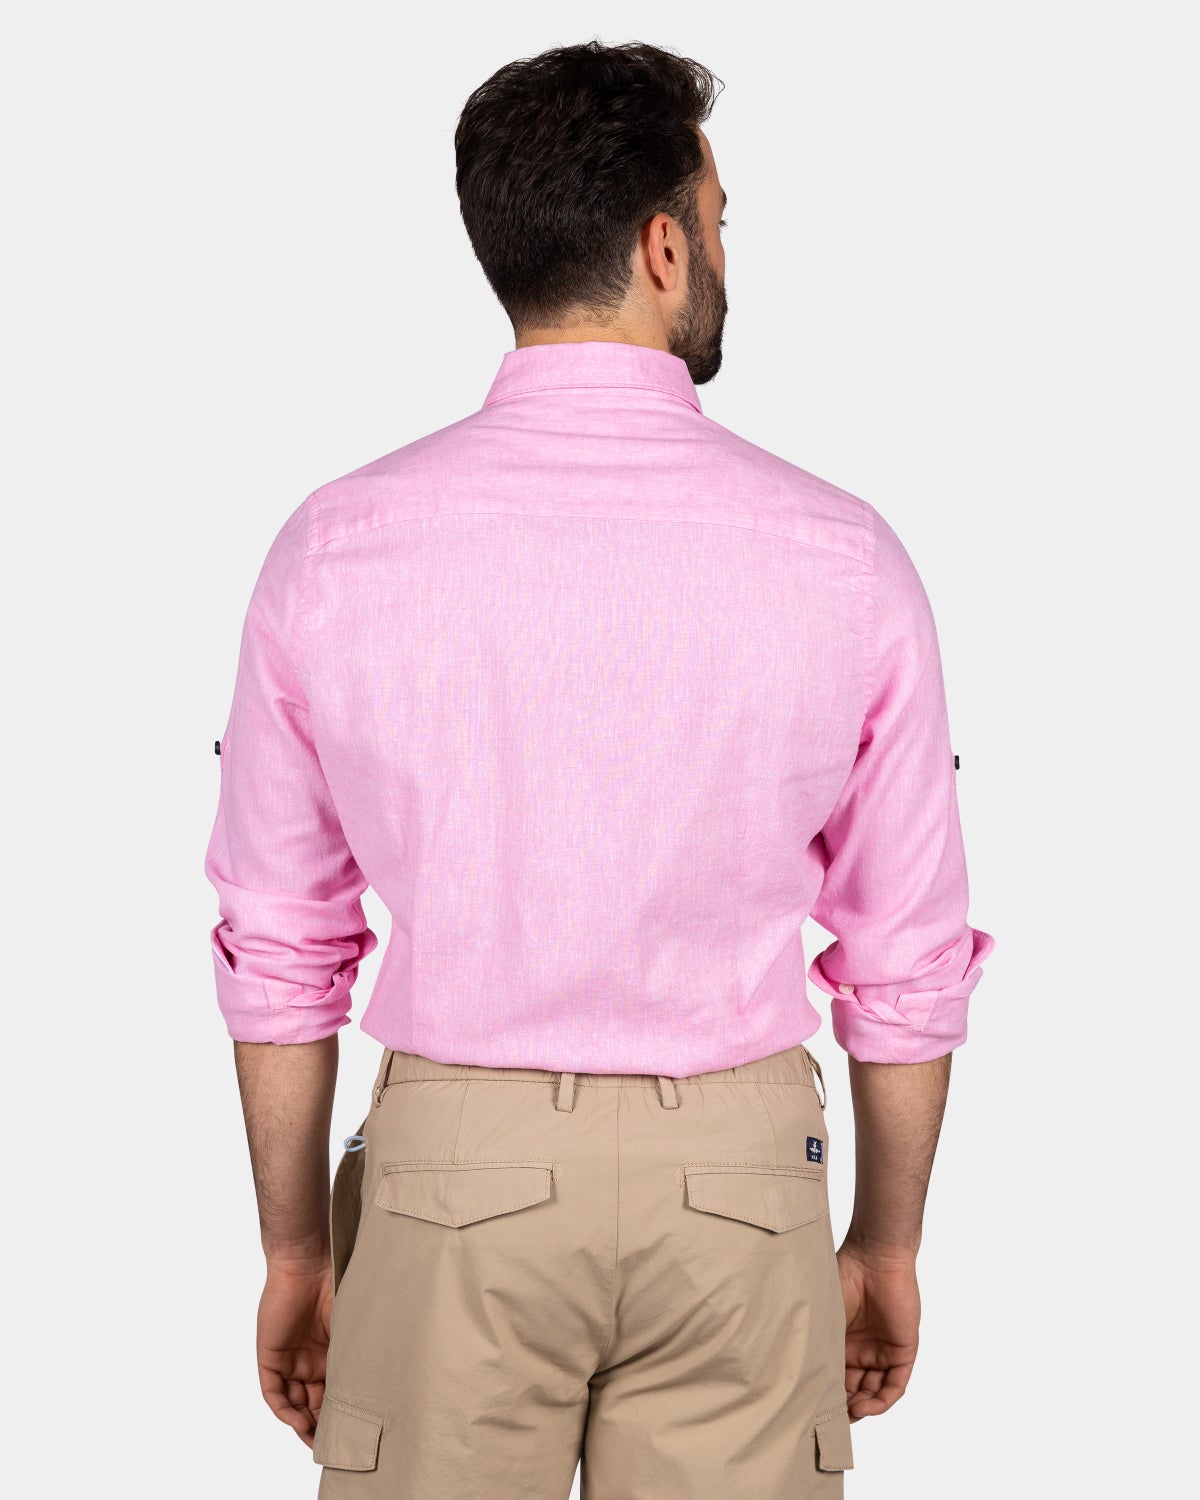 Brightly colored plain shirt - Bright Pink